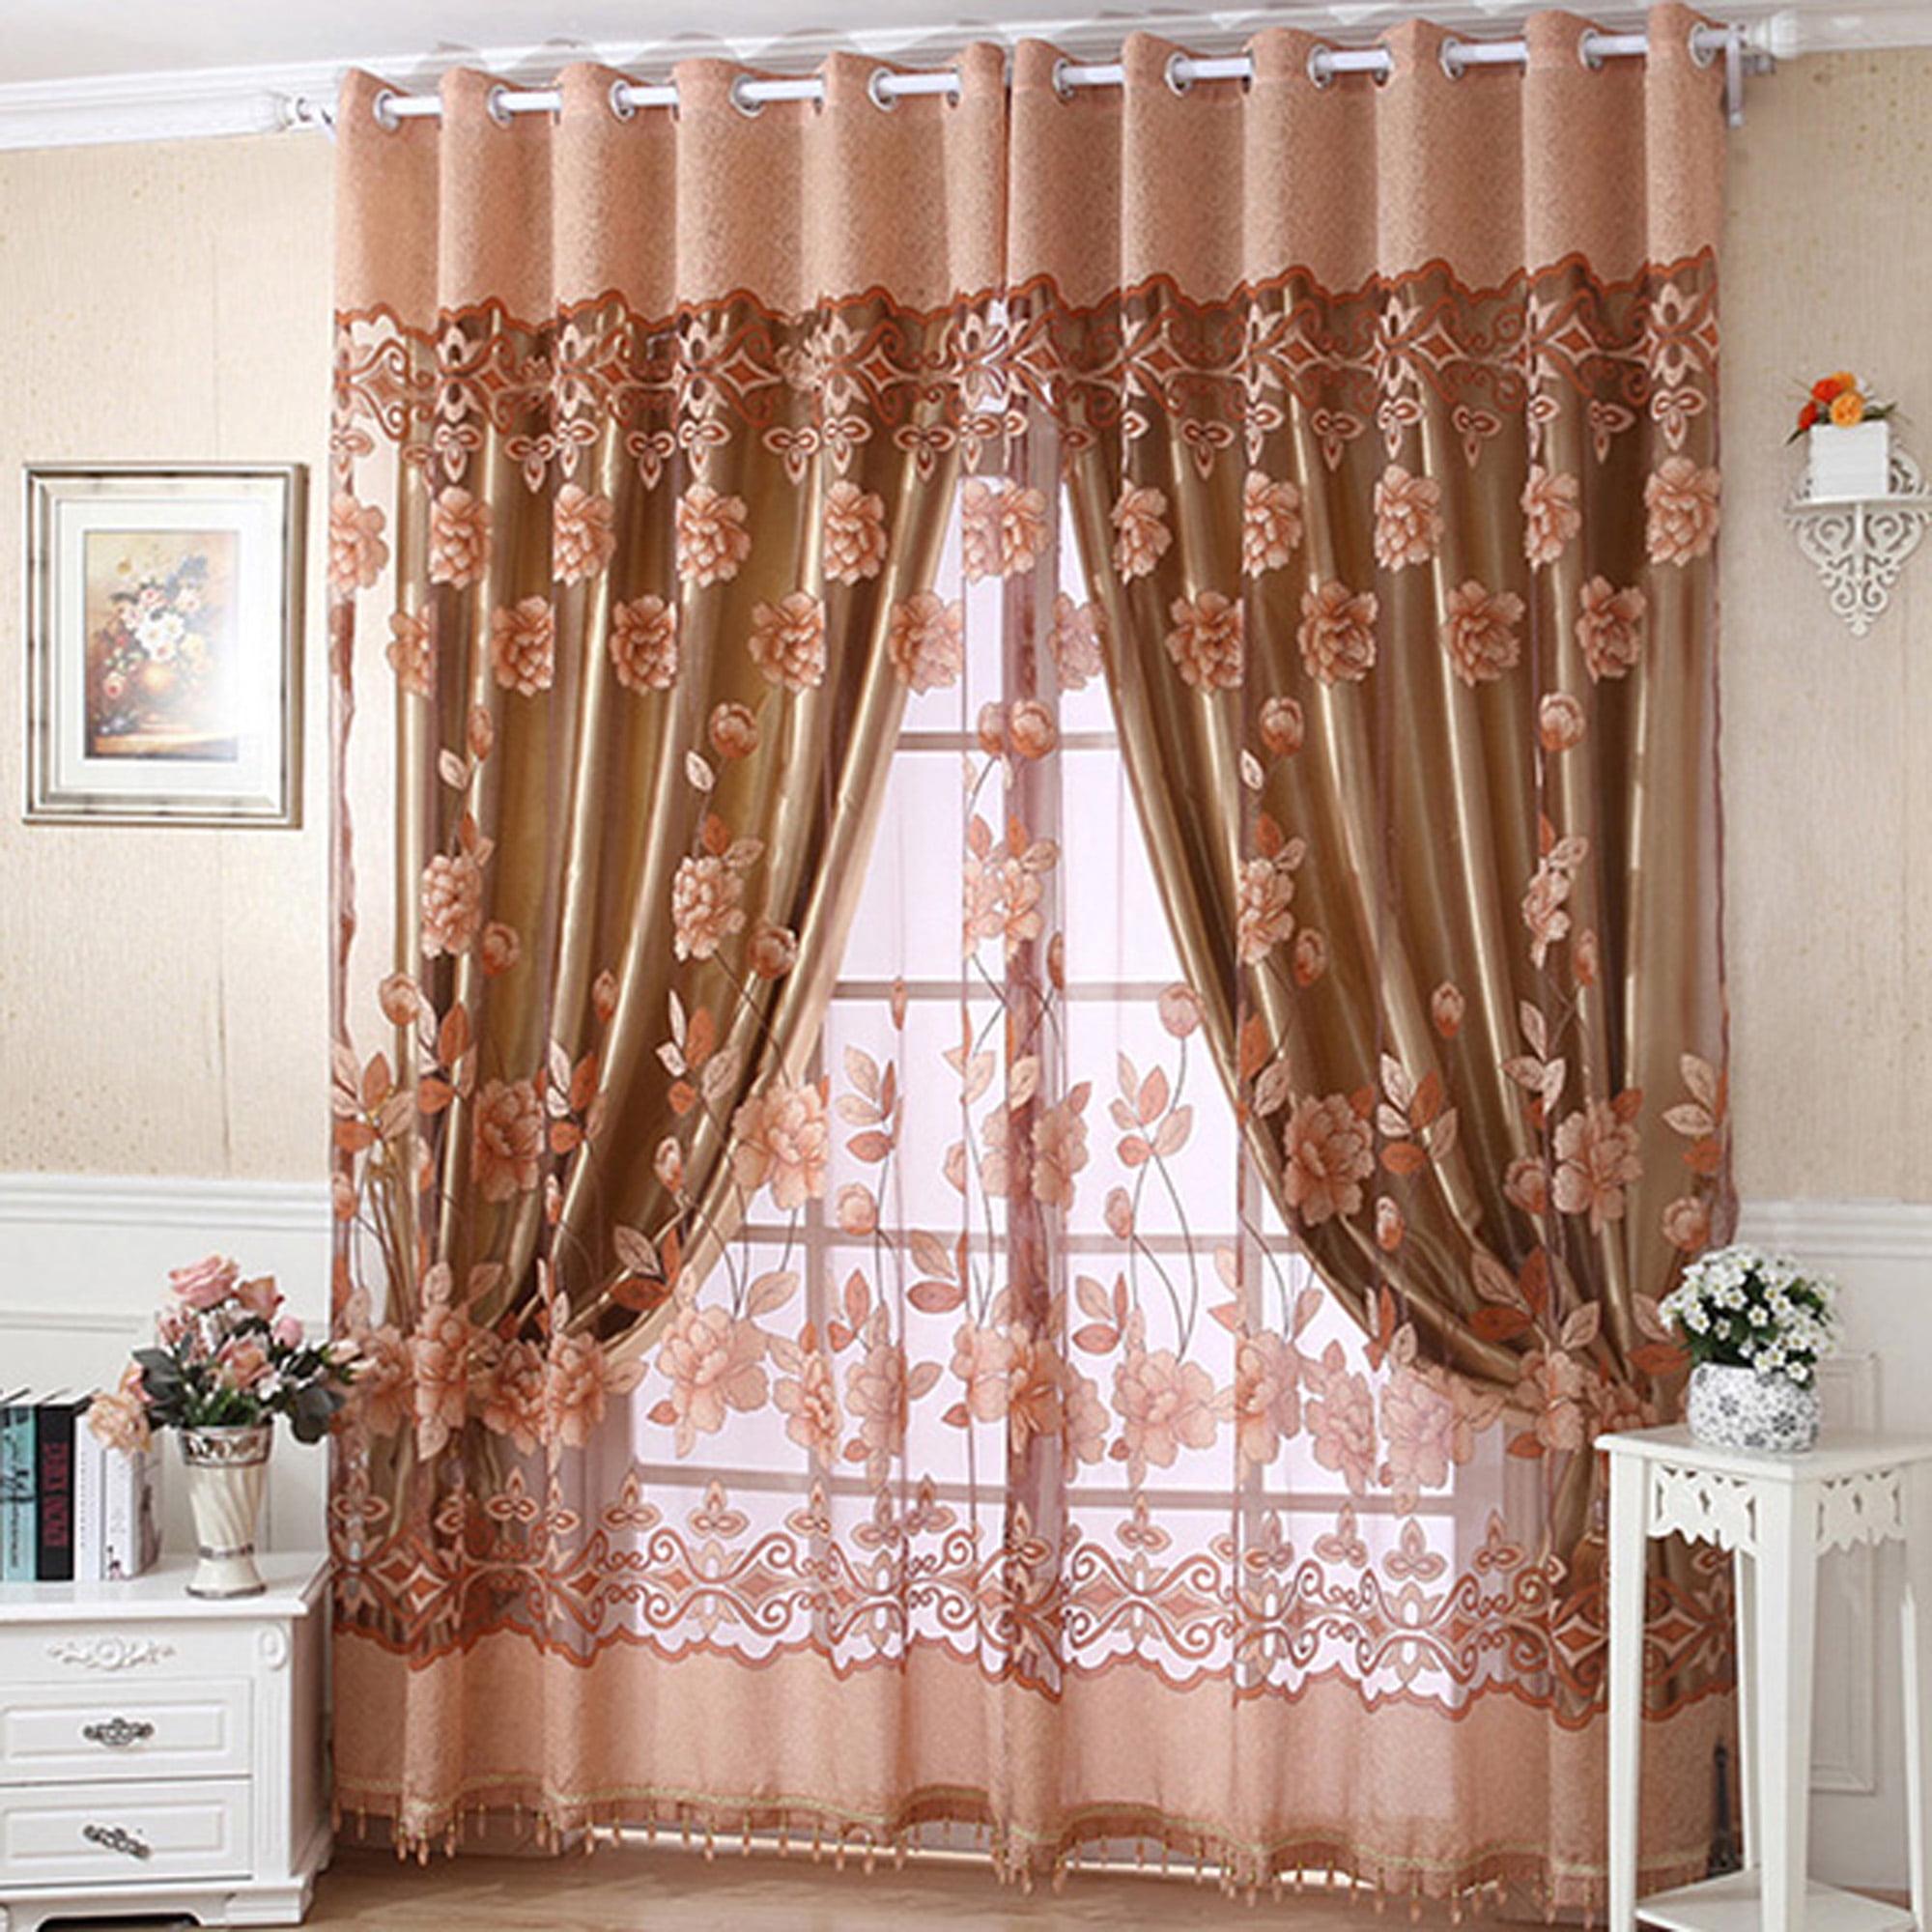 Pair Rod Pocket 96 Inch Long Floral Blossom Print Sheer Curtain 2 Panels Kotile Sheer Curtains for Bedroom 52 x 96 Inches Purple 